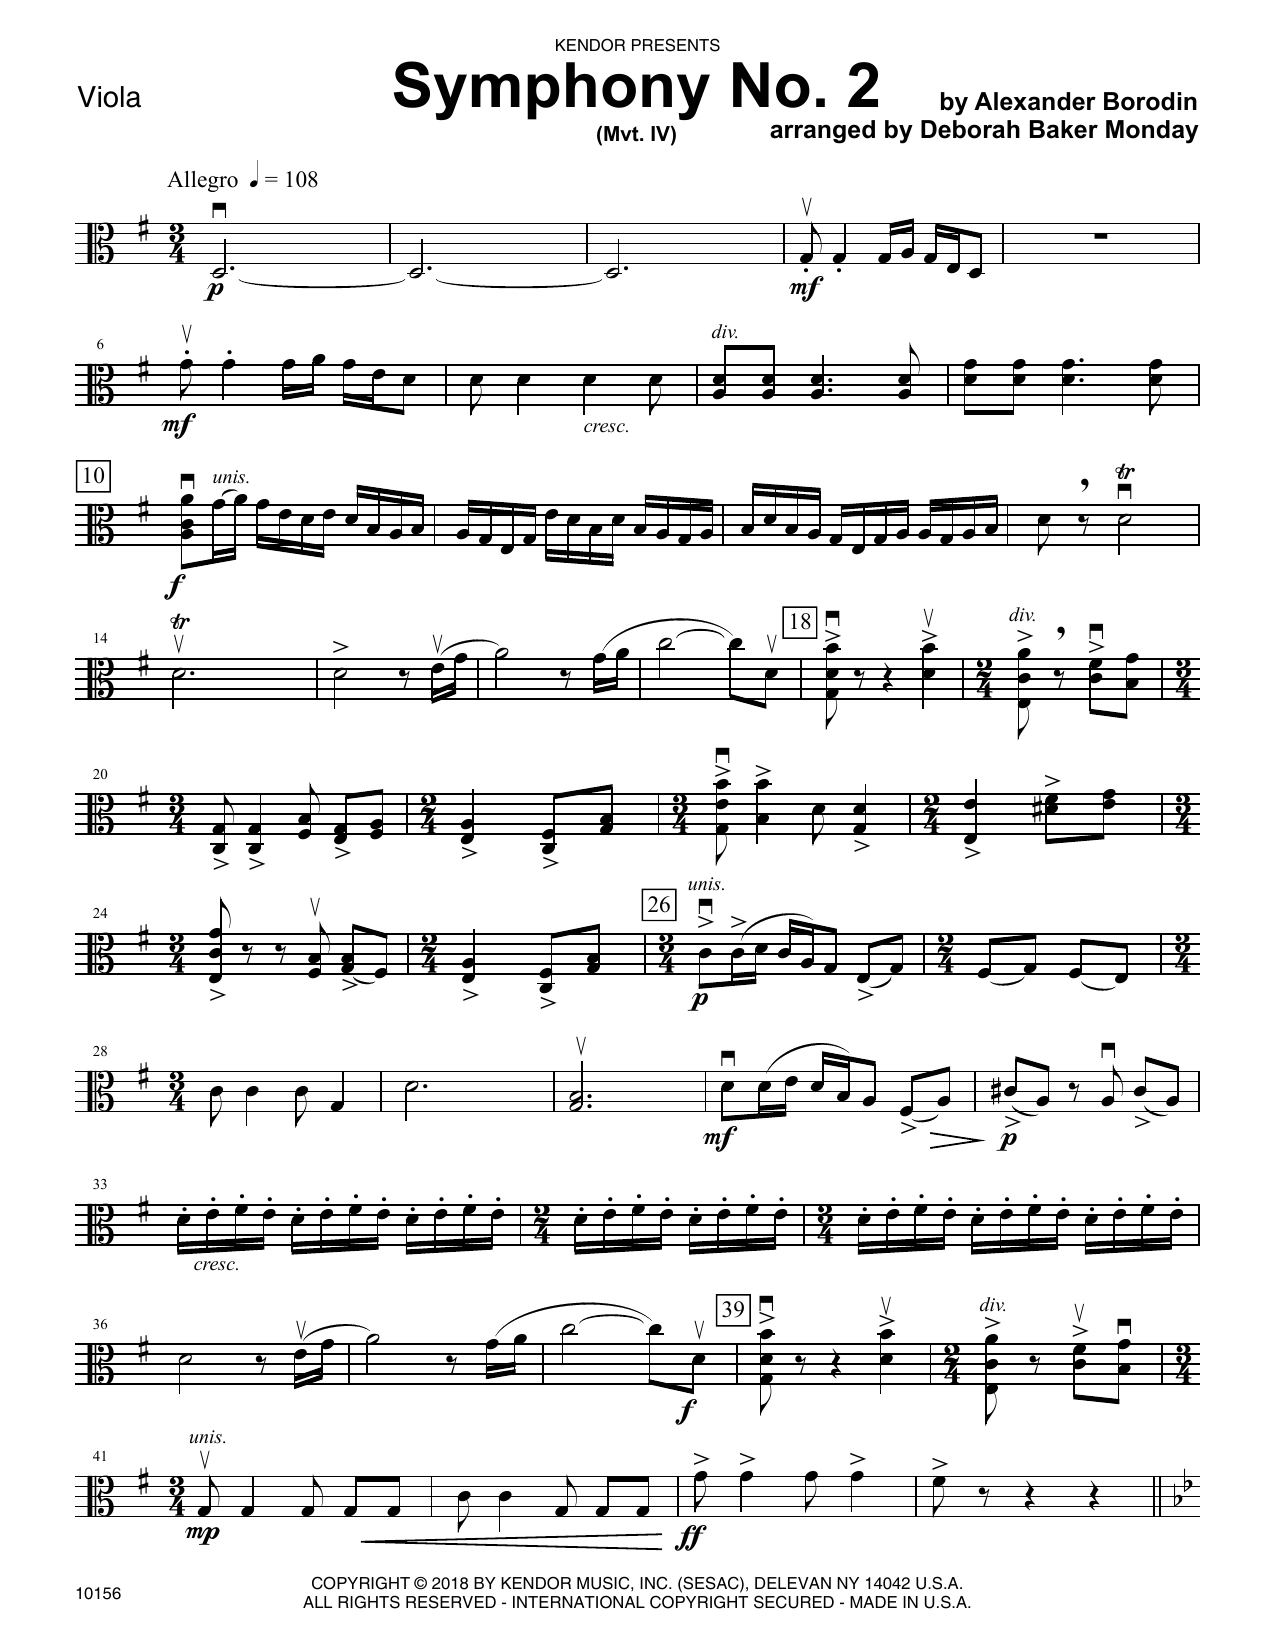 Deborah Baker Monday Symphony No. 2 (Mvt. IV) - Viola sheet music preview music notes and score for Orchestra including 4 page(s)